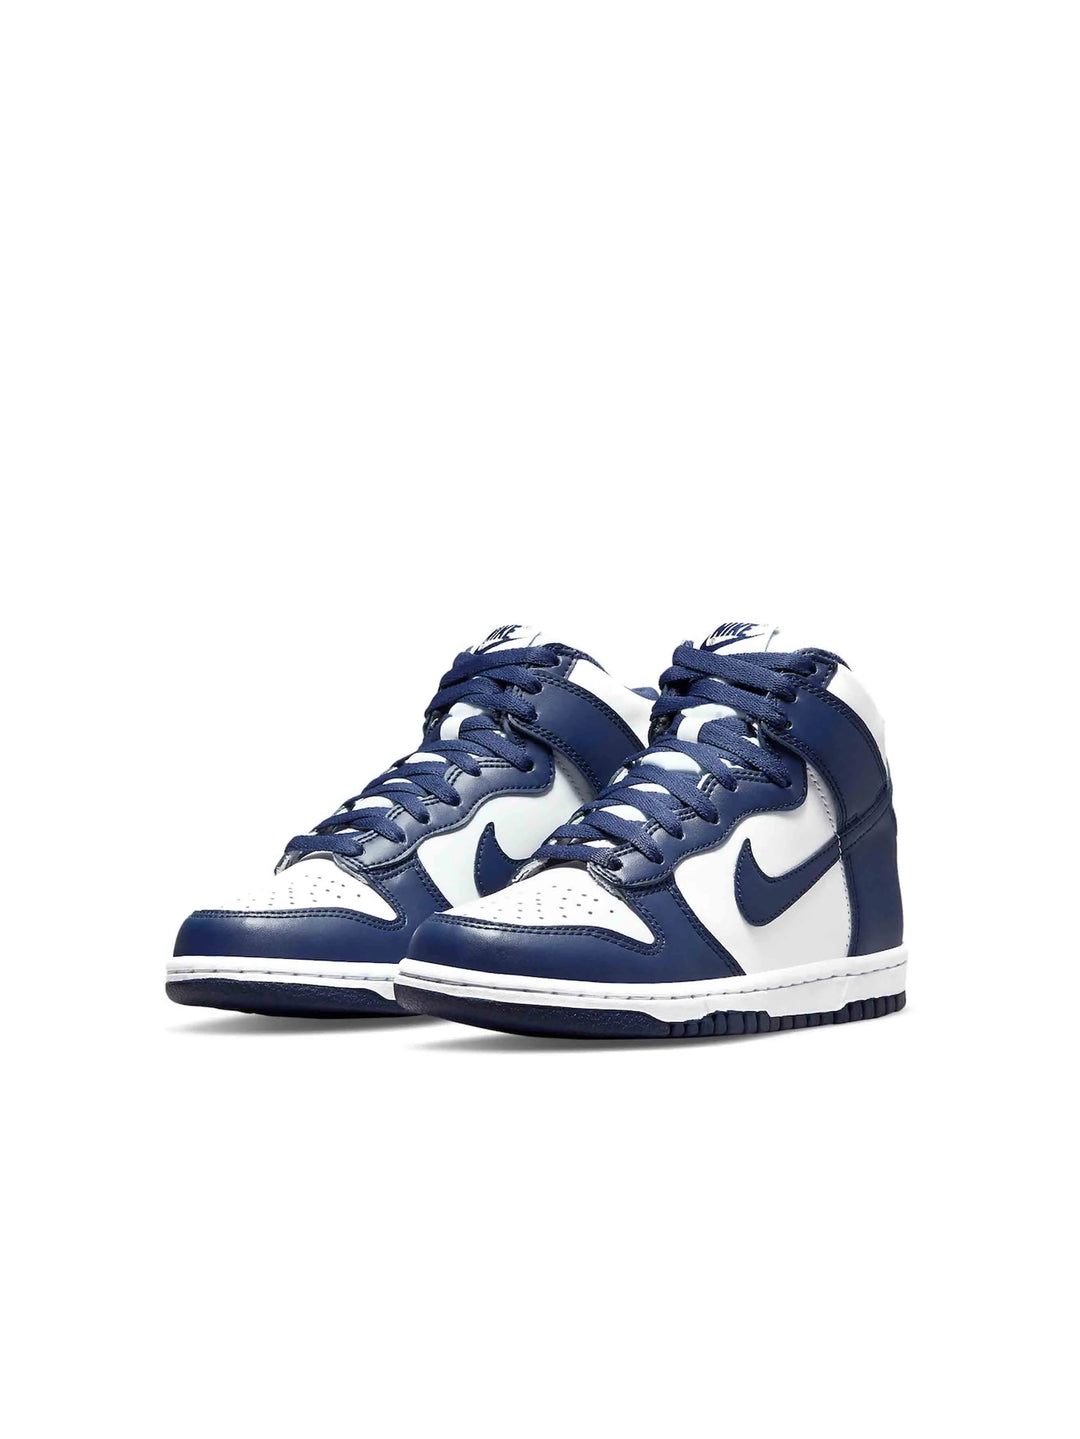 Nike Dunk High Championship Navy (GS) in Auckland, New Zealand - Shop name